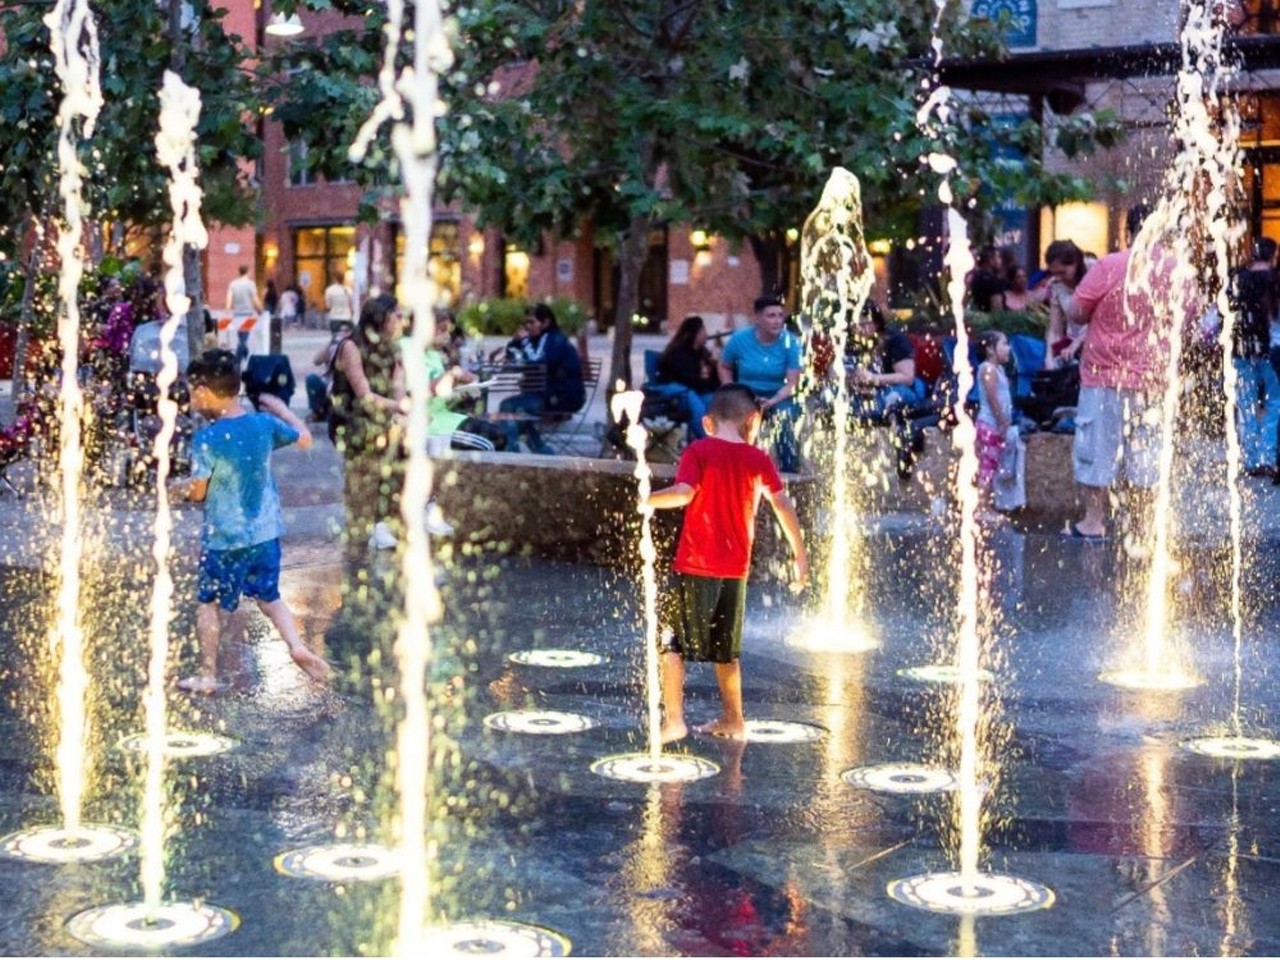 Cool down with the kids at a splash pad
A splash pad is a simple pleasure that kids love. Many San Antonio parks have splash pads, including Pearsall Park and Yanaguana Garden at Hemisfair, as well as at Pearl Brewery near the Bottling Department.